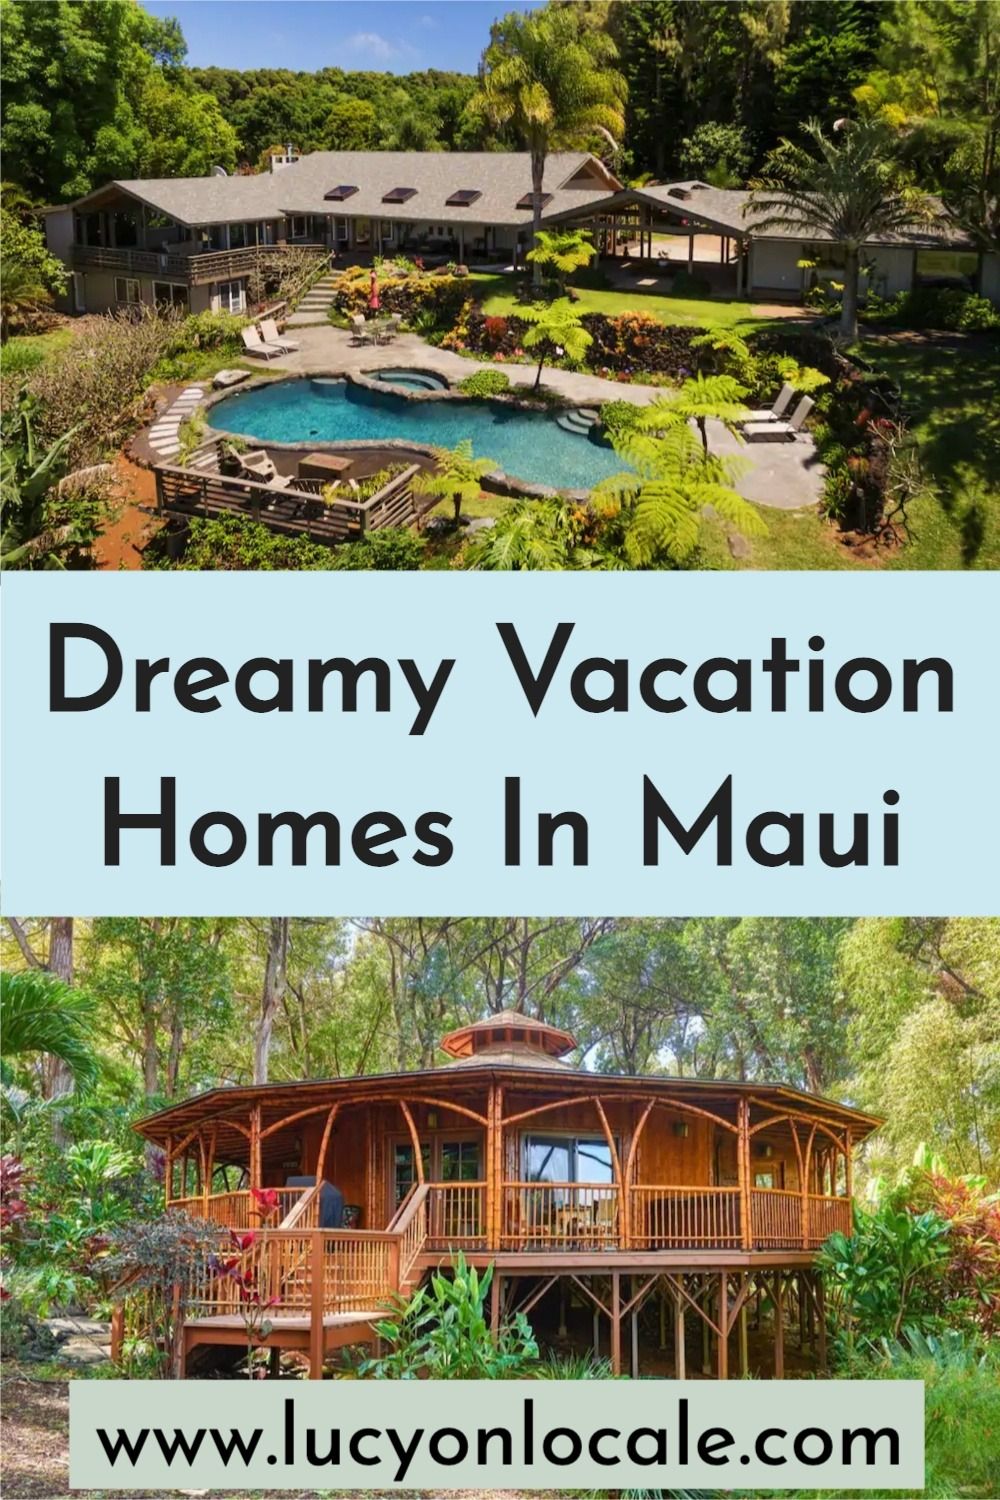 Vacation Homes in Maui